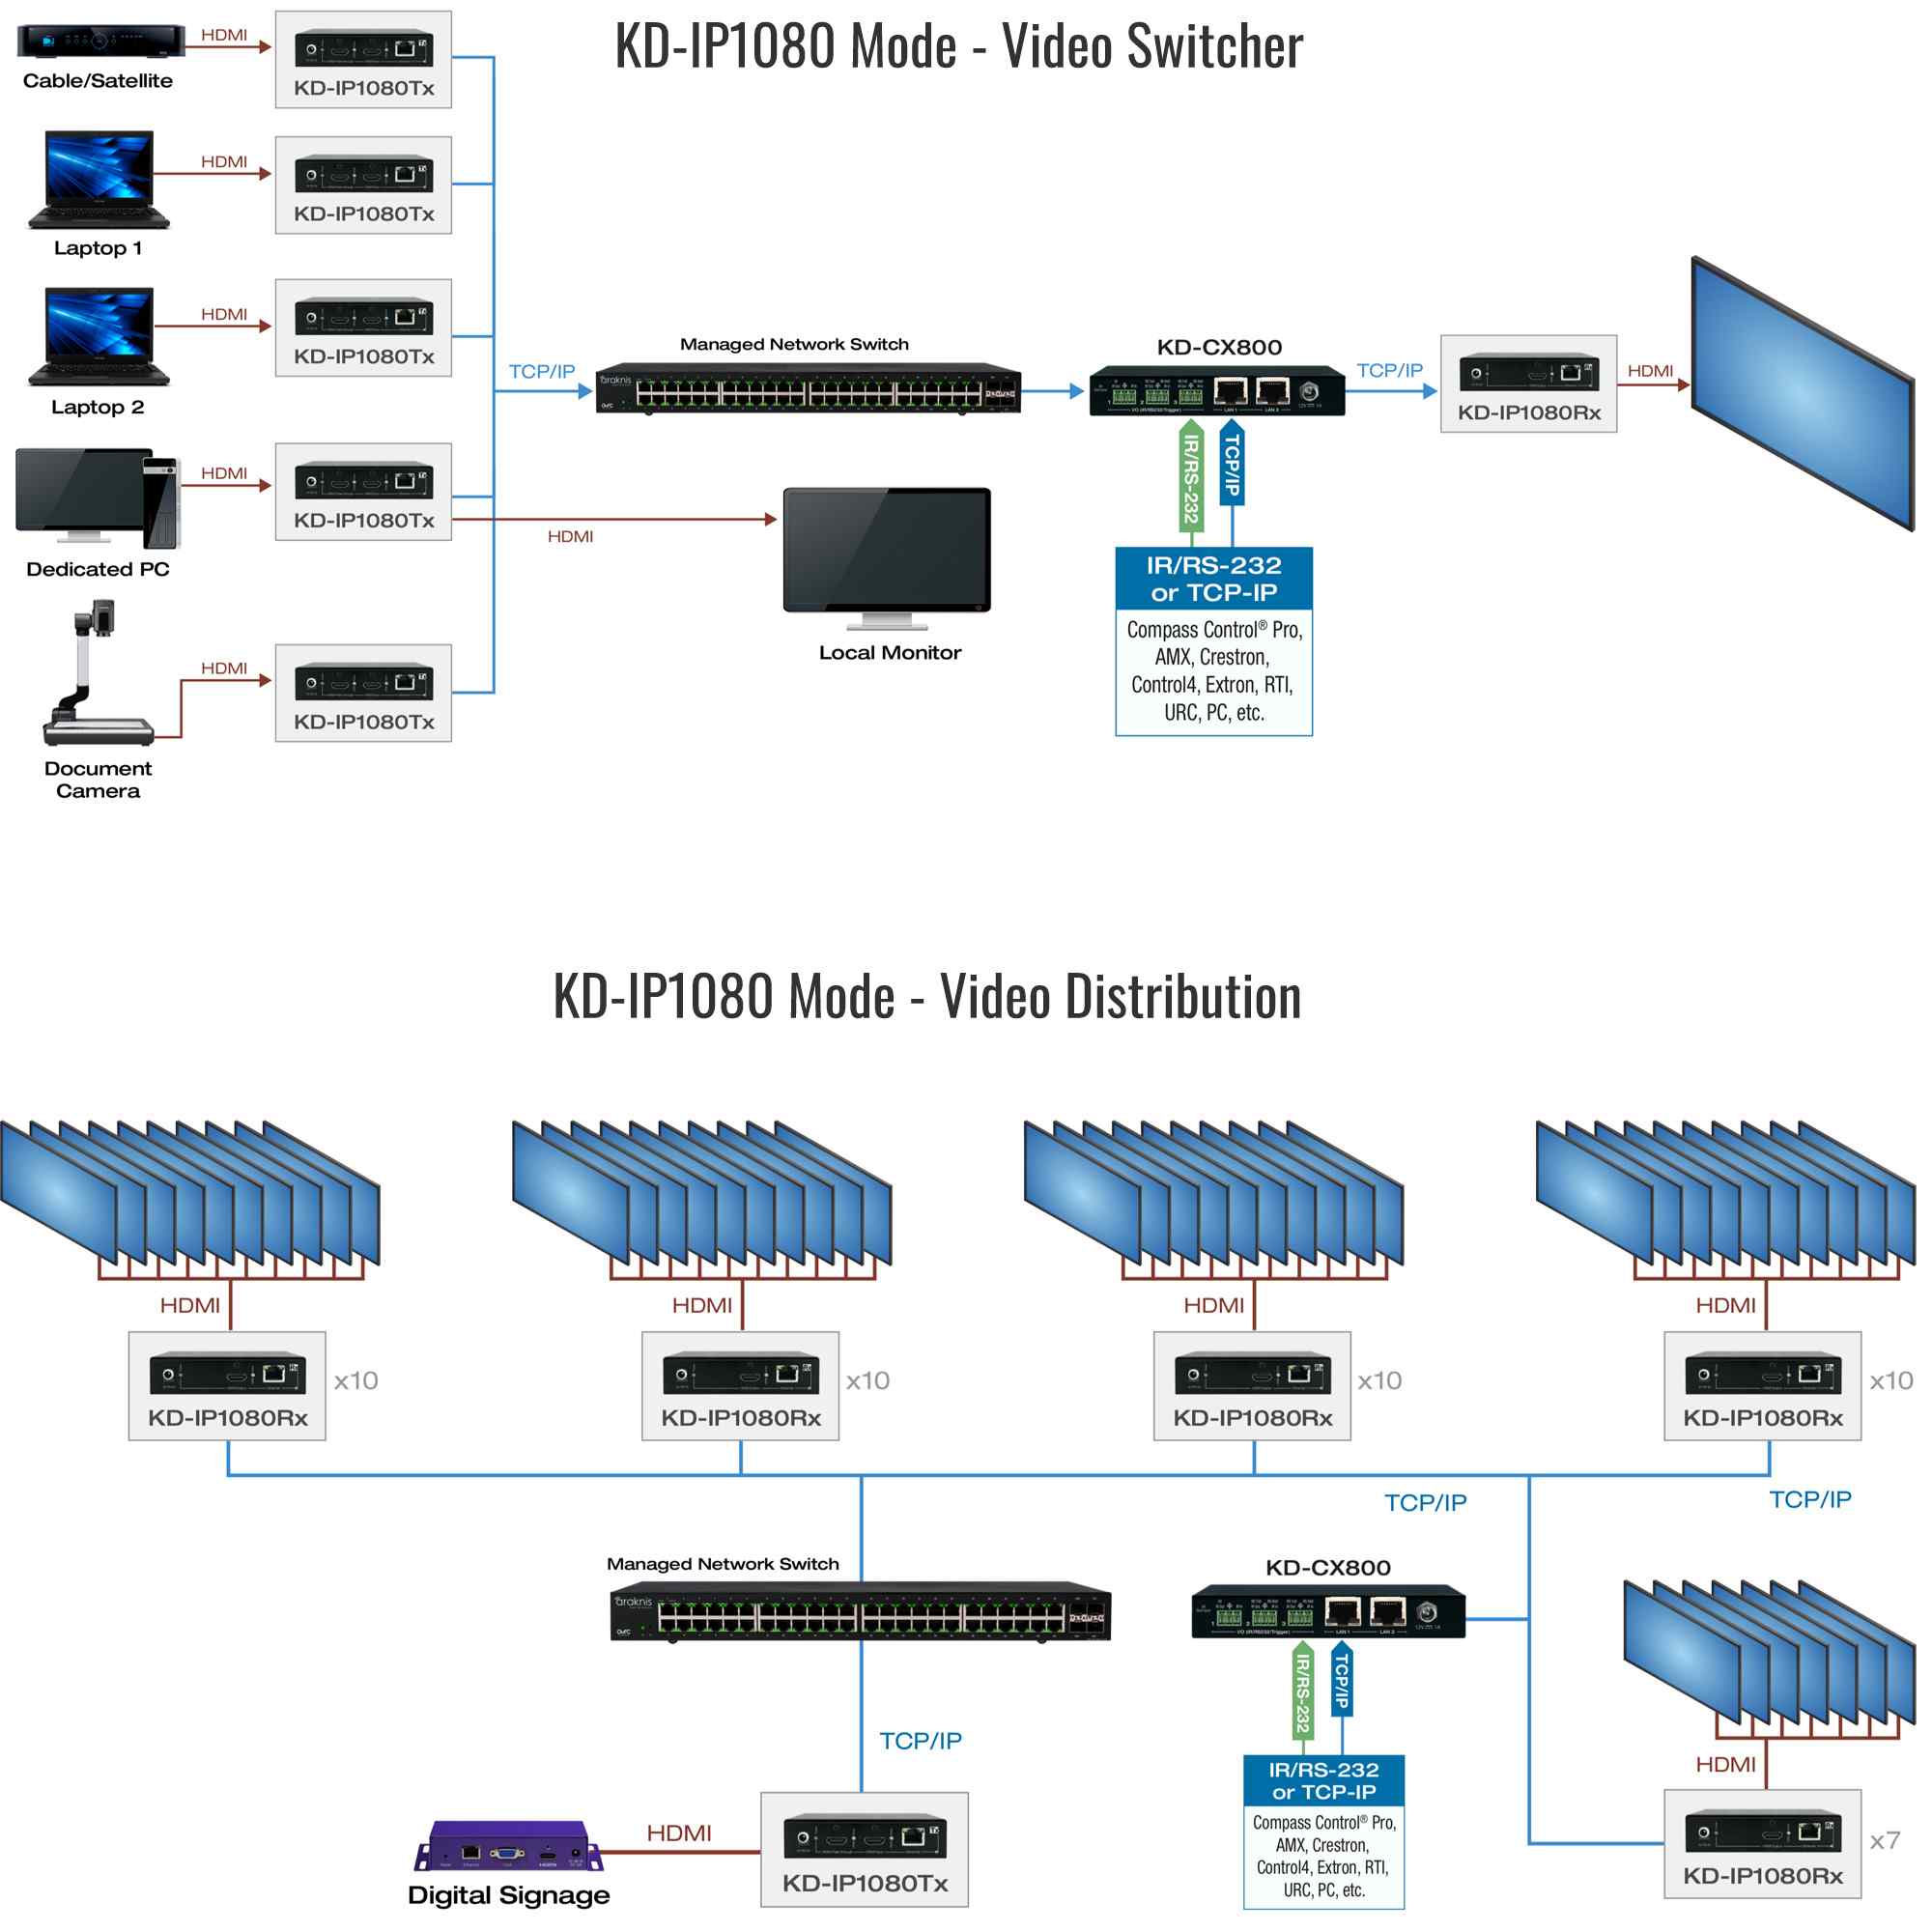 Thumbnail of Example Diagram showing the video switch and distribution mode of AV over IP System 